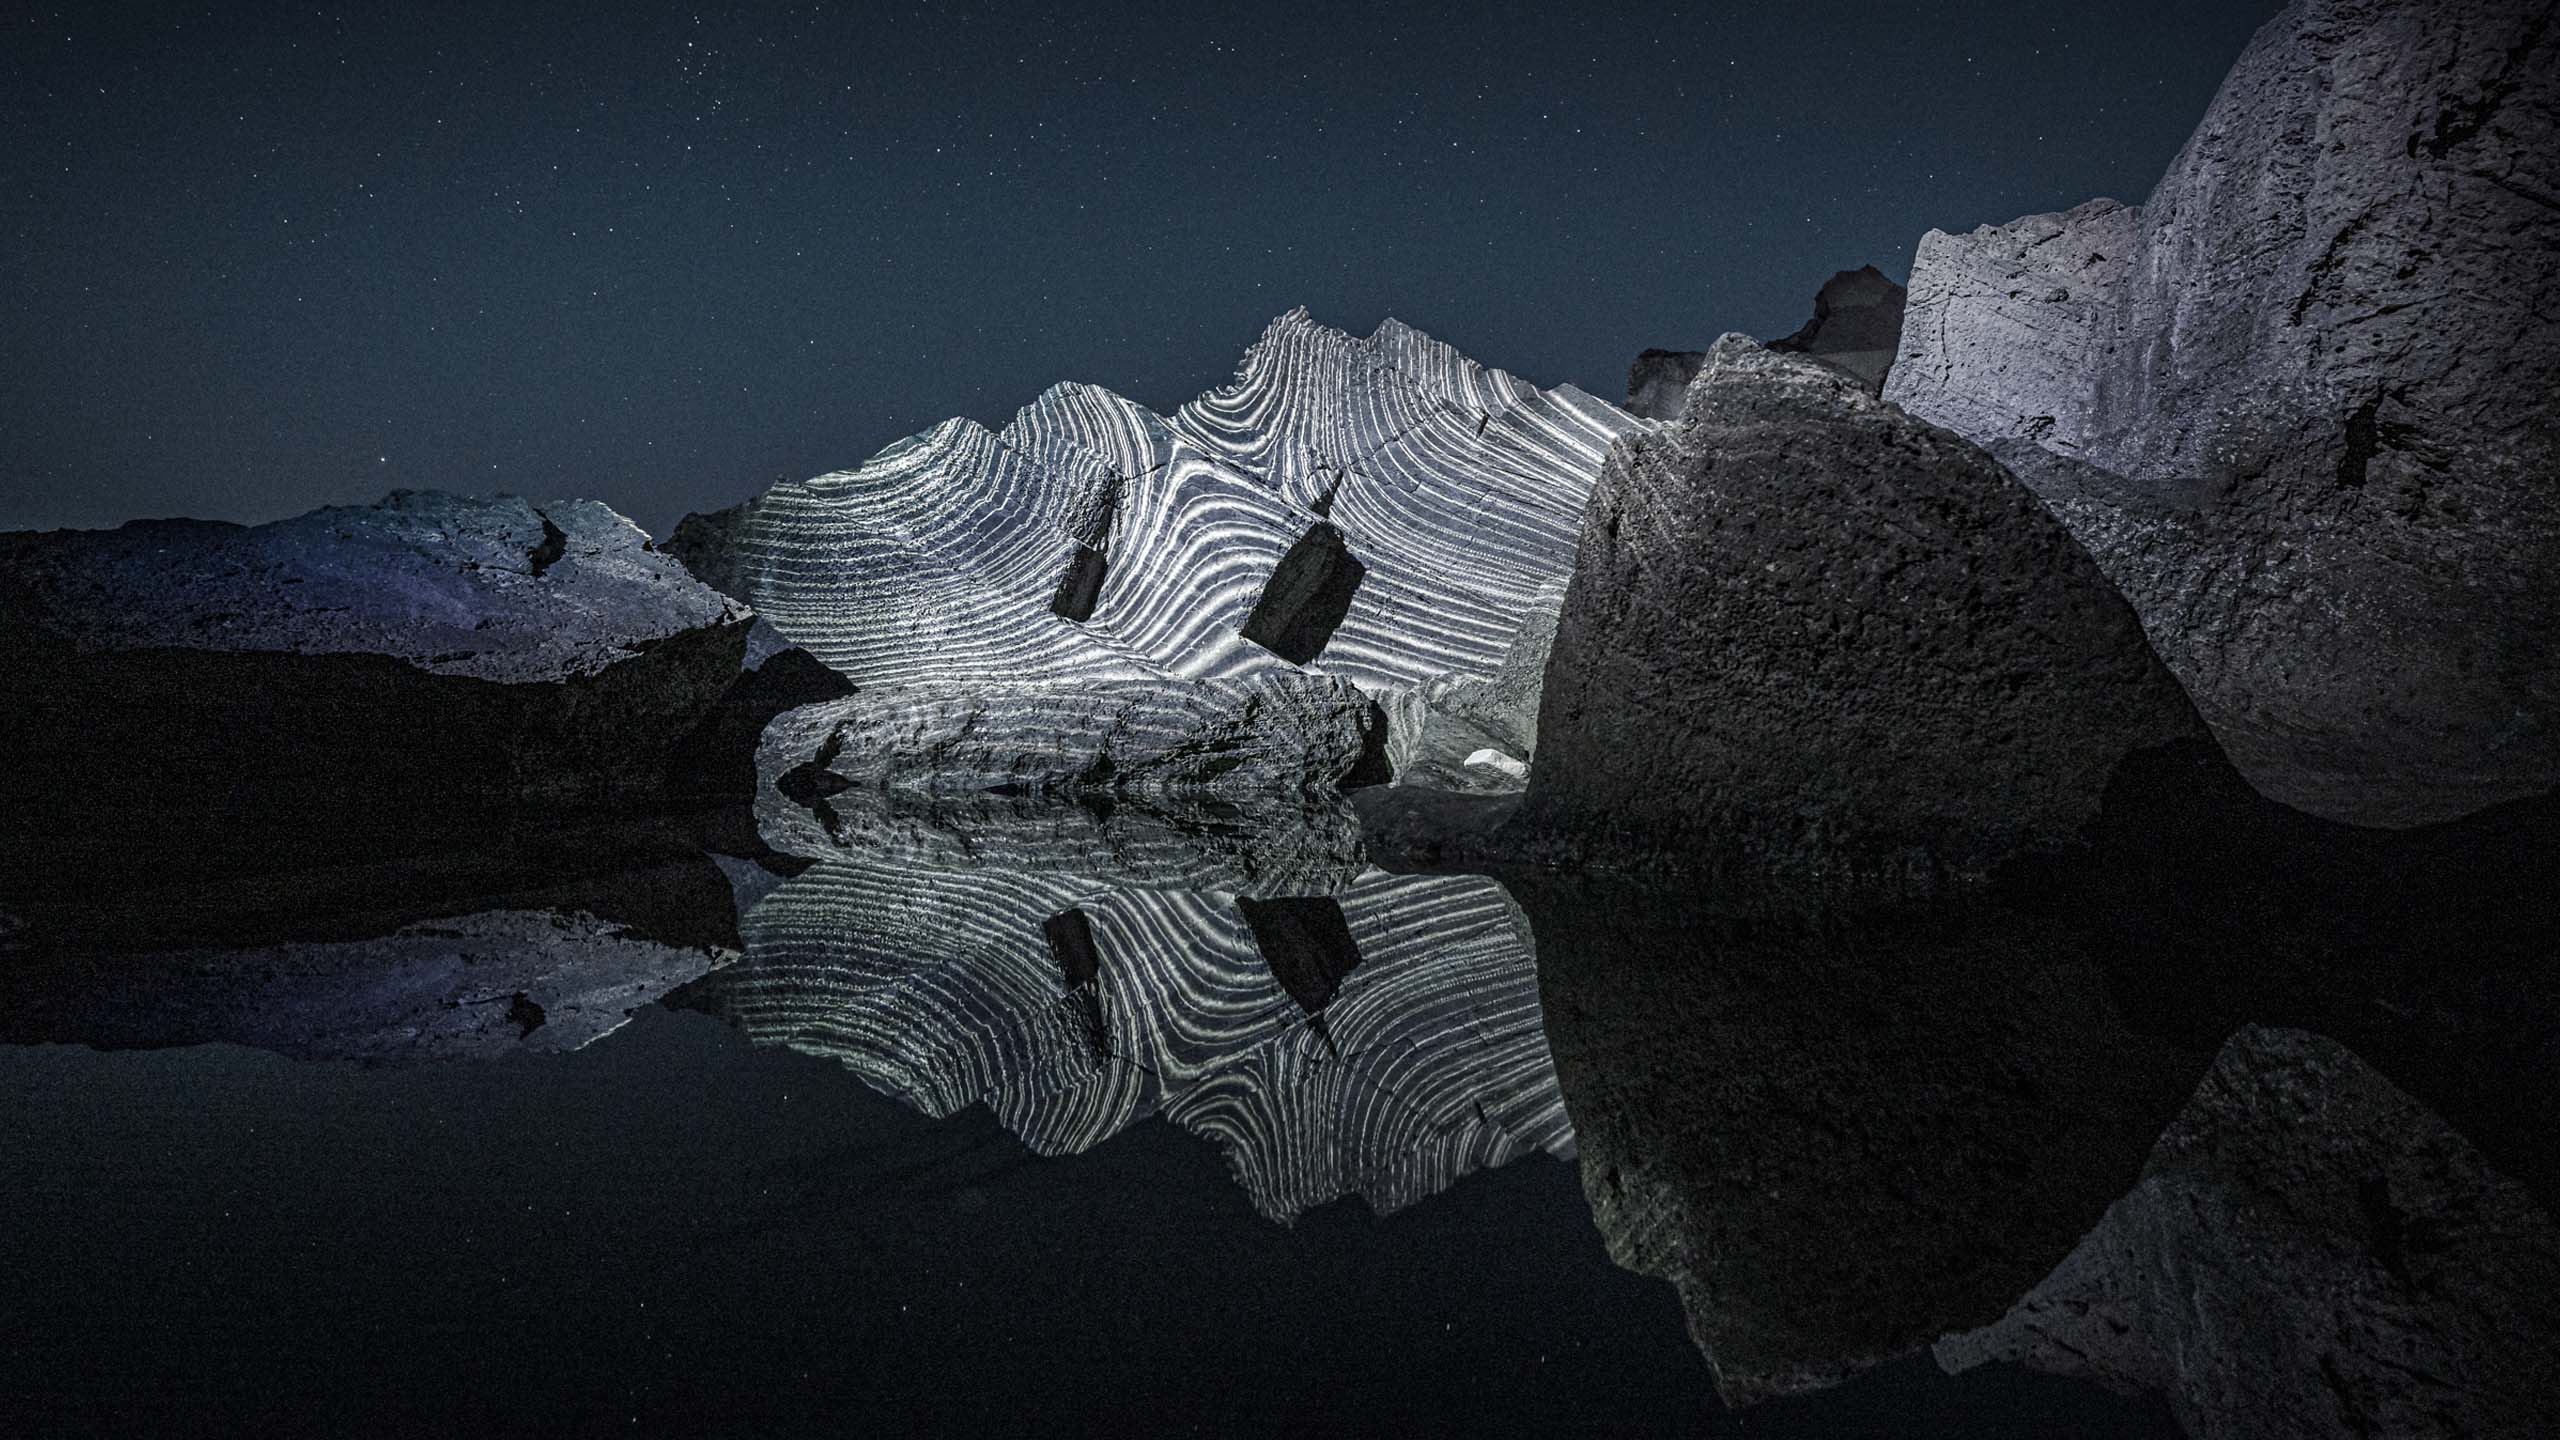 Land light art video projection installation in nature on a group of rocks with reflections in the water, Formentera